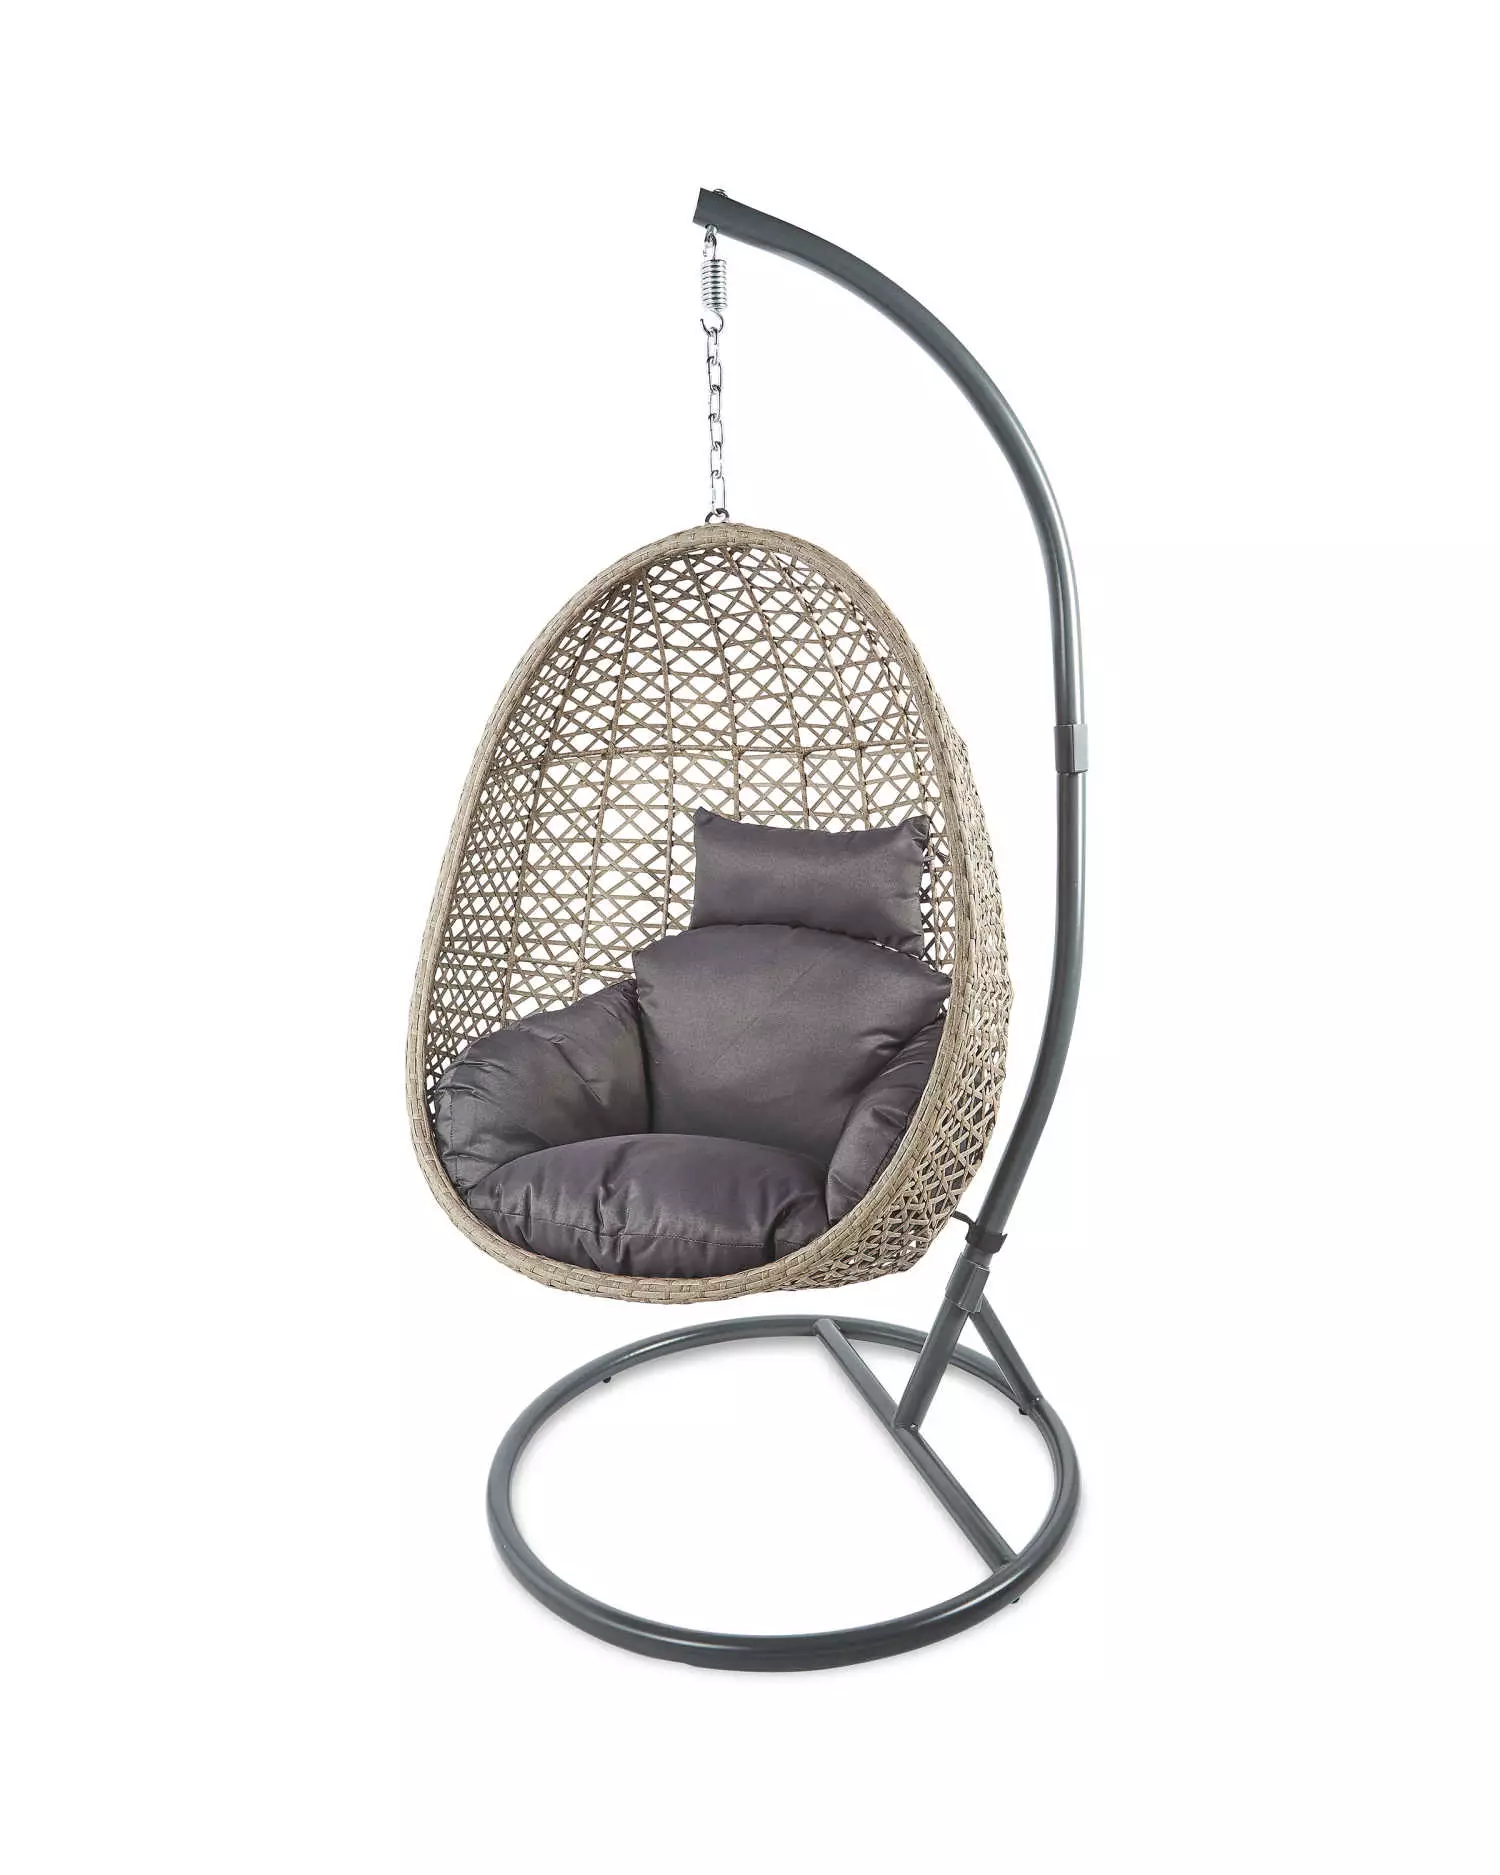 Aldi's £149 hanging egg chair is back in stock '